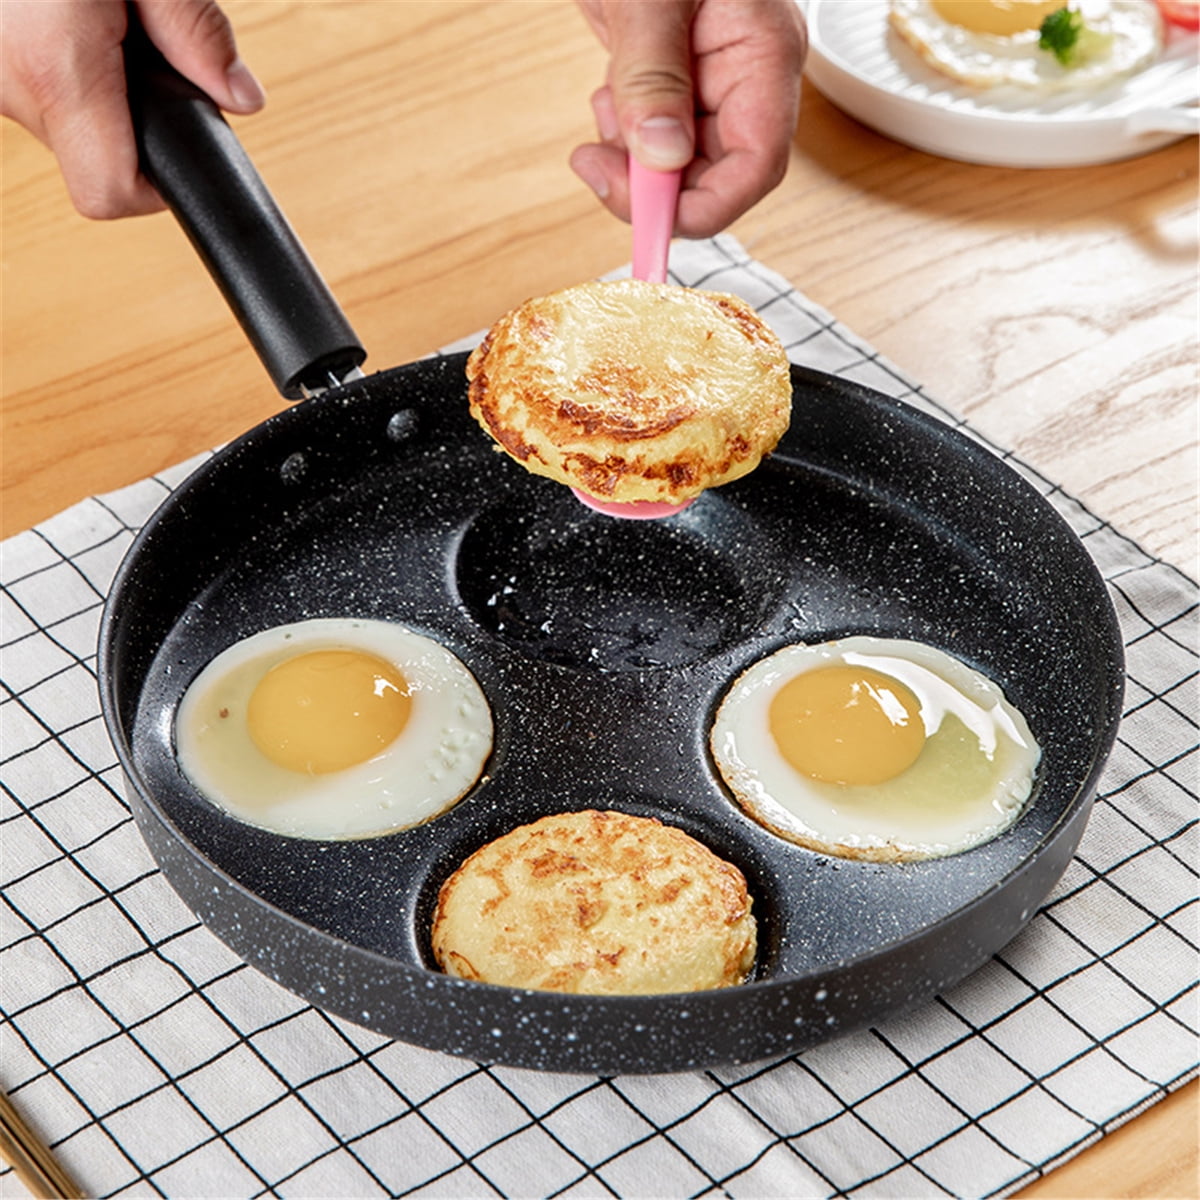 4-Cup Nonstick Egg Frying Pan Set with Silicone Kitchen Tongs – Parmedu